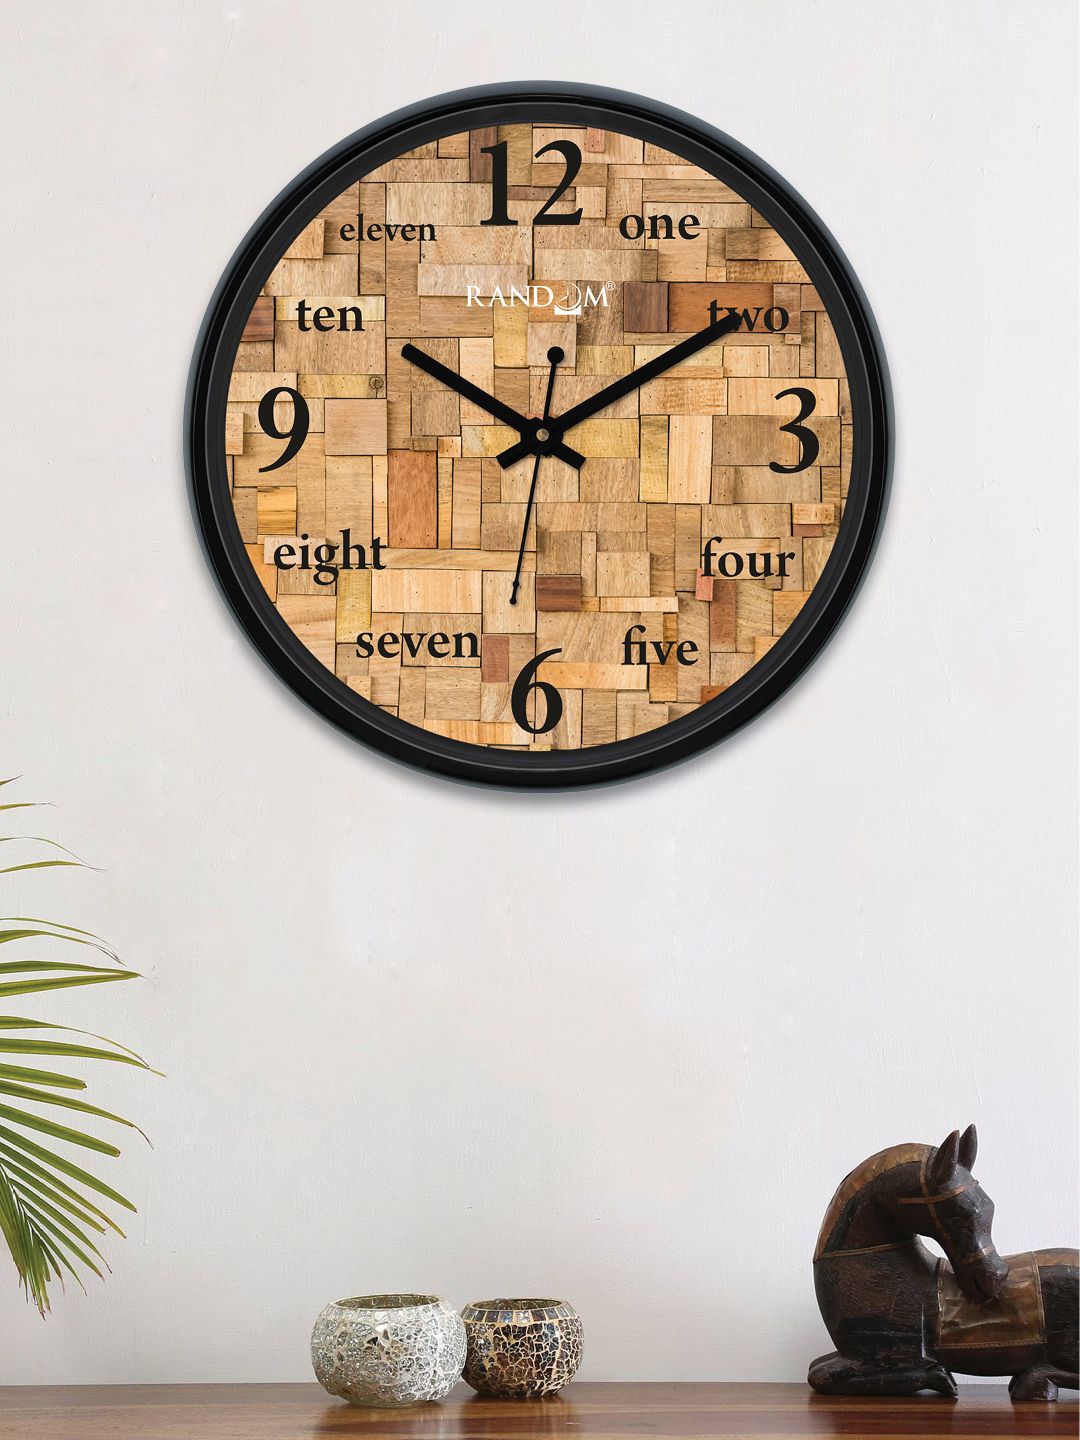 RANDOM Camel Brown Round Printed 30 cm Analogue Wall Clock Price in India